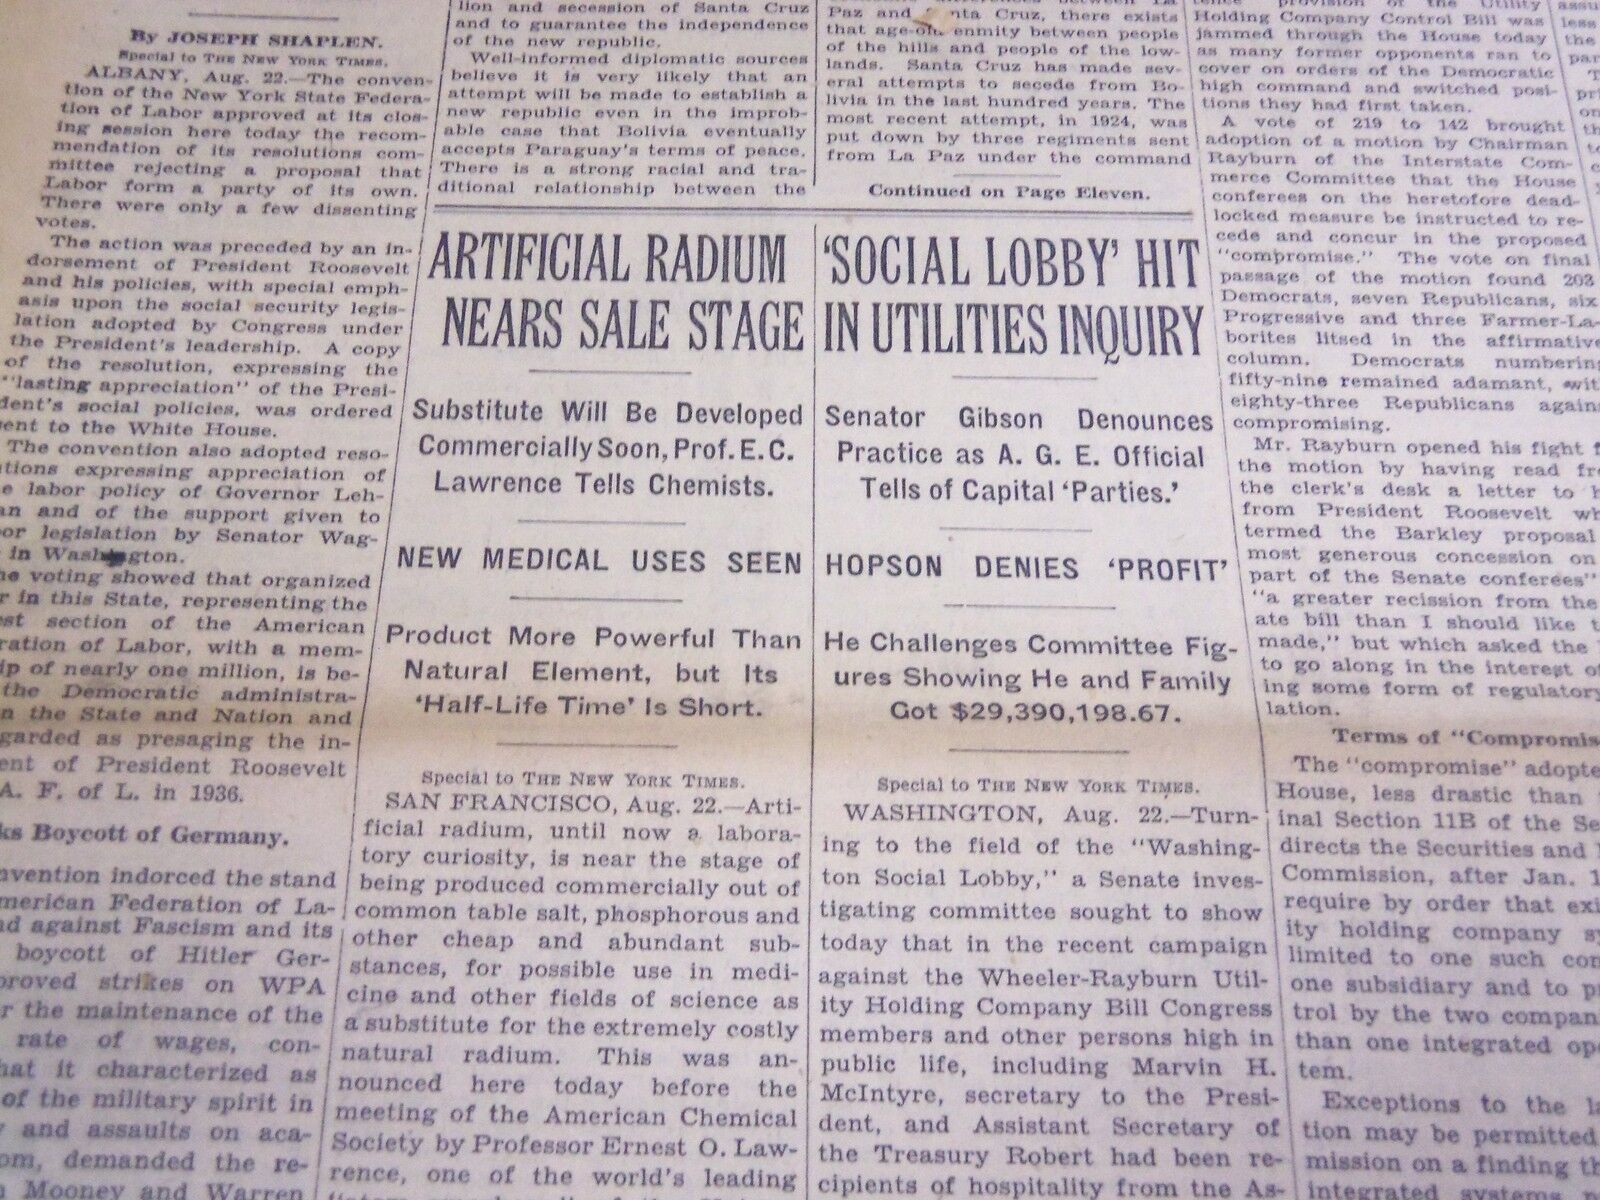 1935 AUGUST 23 NEW YORK TIMES - ARTIFICIAL RADIUM NEARS SALE STAGE - NT 4905